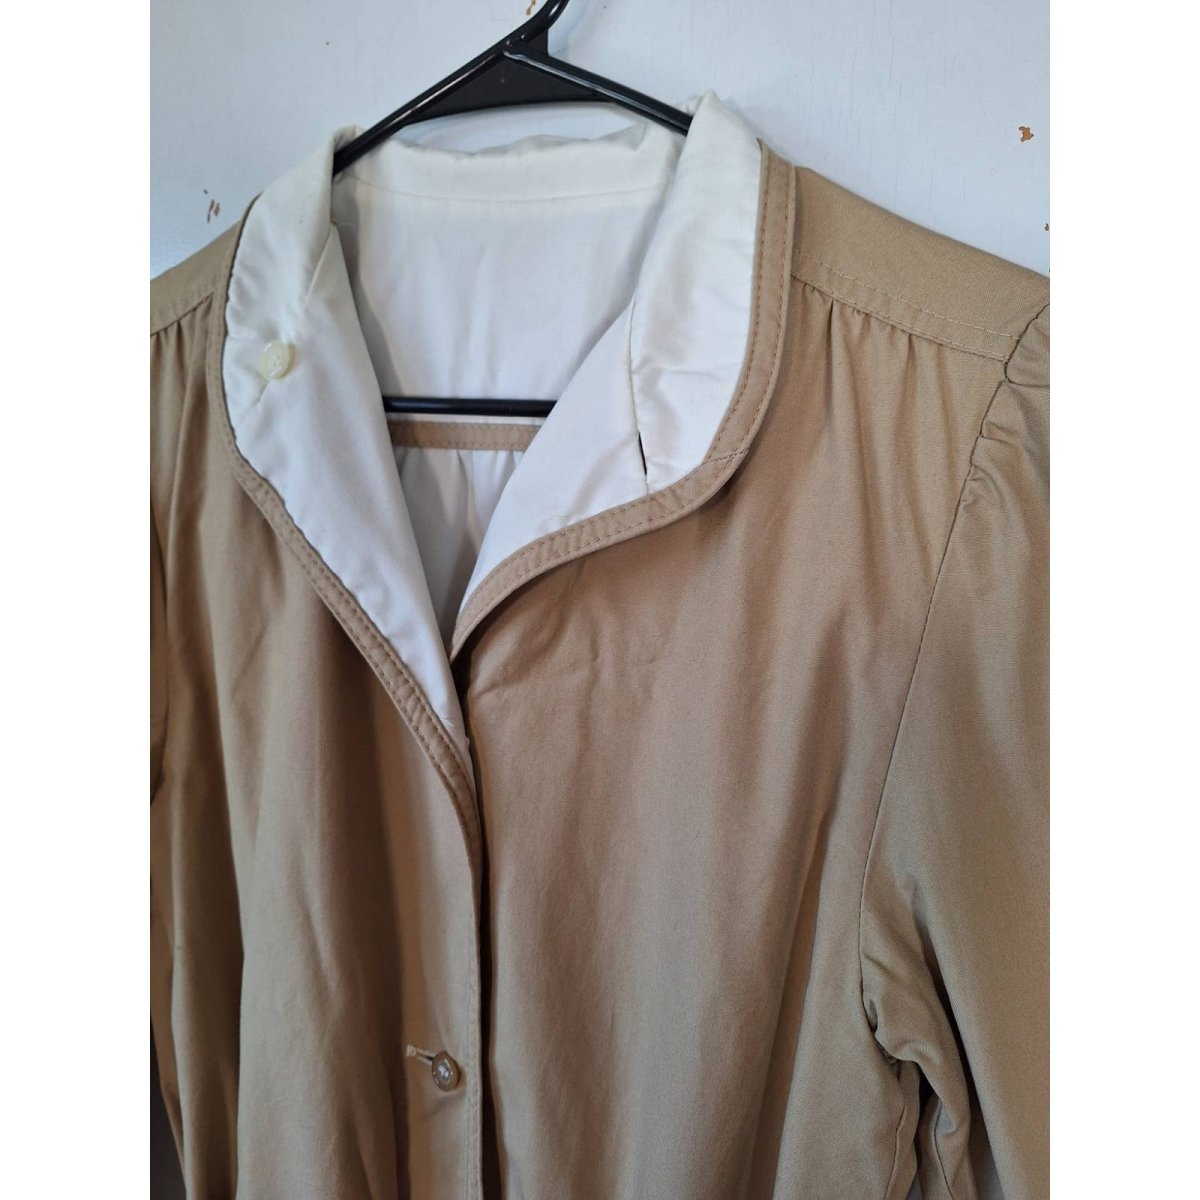 Vintage 80s Reversible Cream/Tan Puff Sleeve Trench Coat Women's Size 4 Small - themallvintage The Mall Vintage